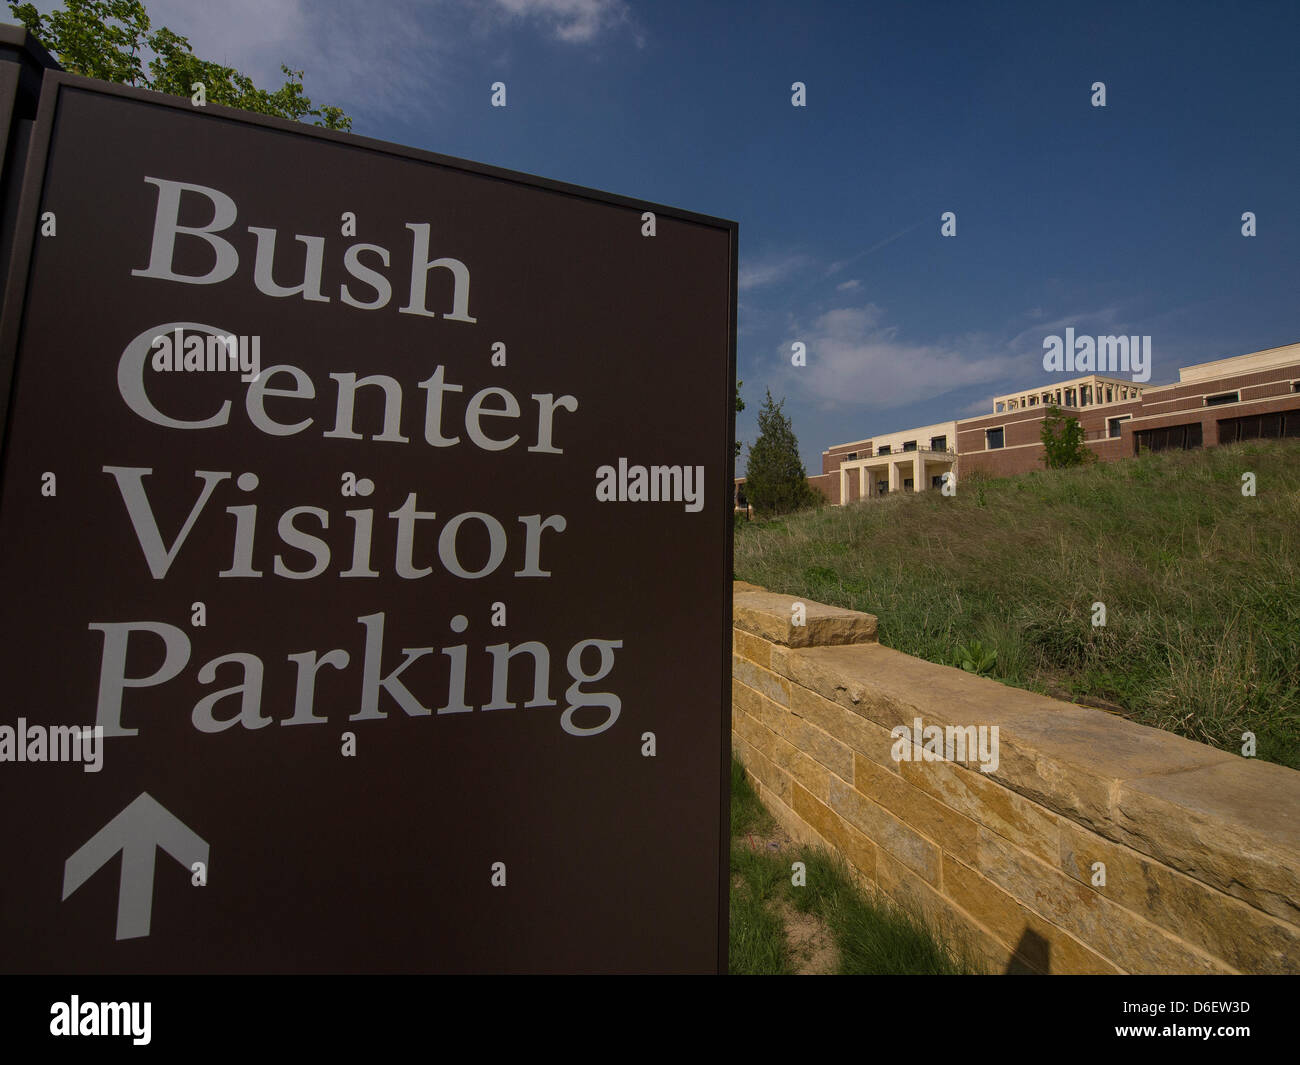 Signs direct visitors to parking lot in front of the Gorge W Bush presidential library and museum opening May 1st, 2013,. Robert A. M. Stern the architect Stock Photo